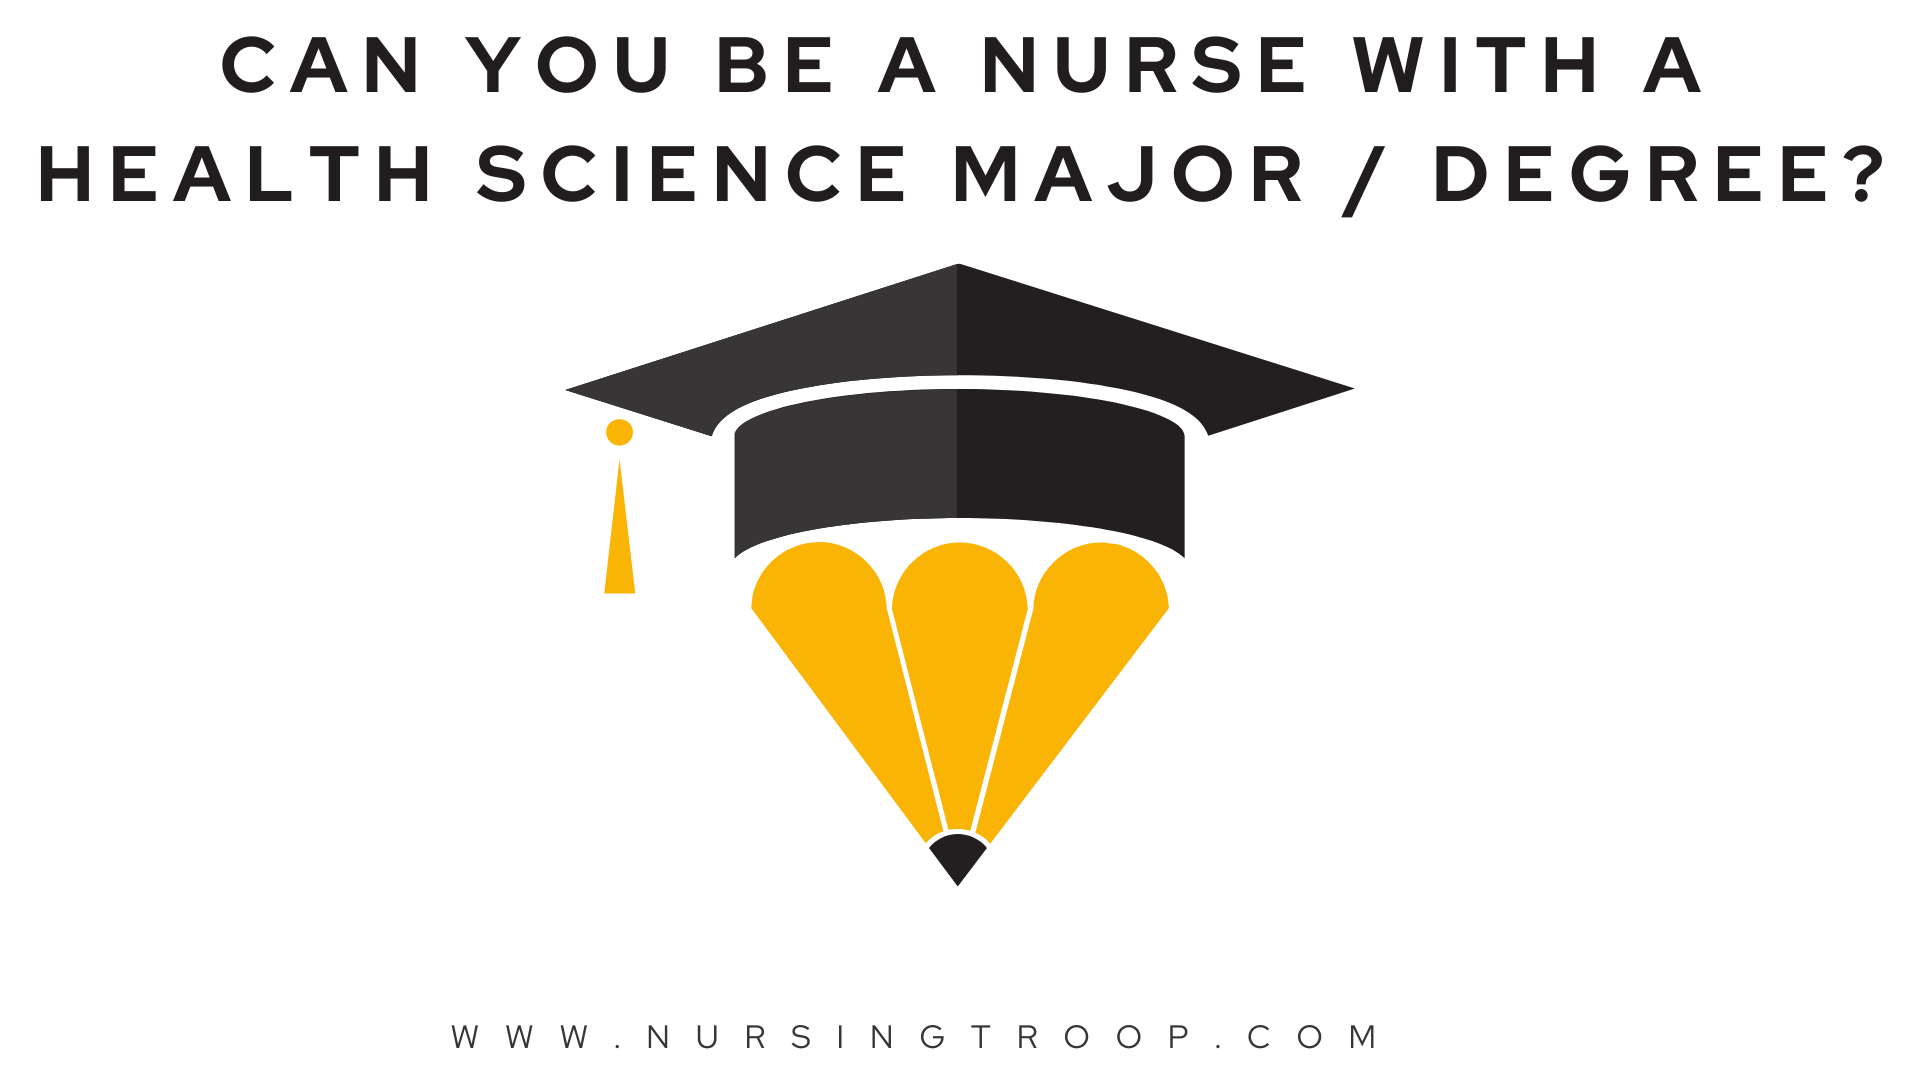 Can You Be a Nurse with a Health Science Major / Degree?